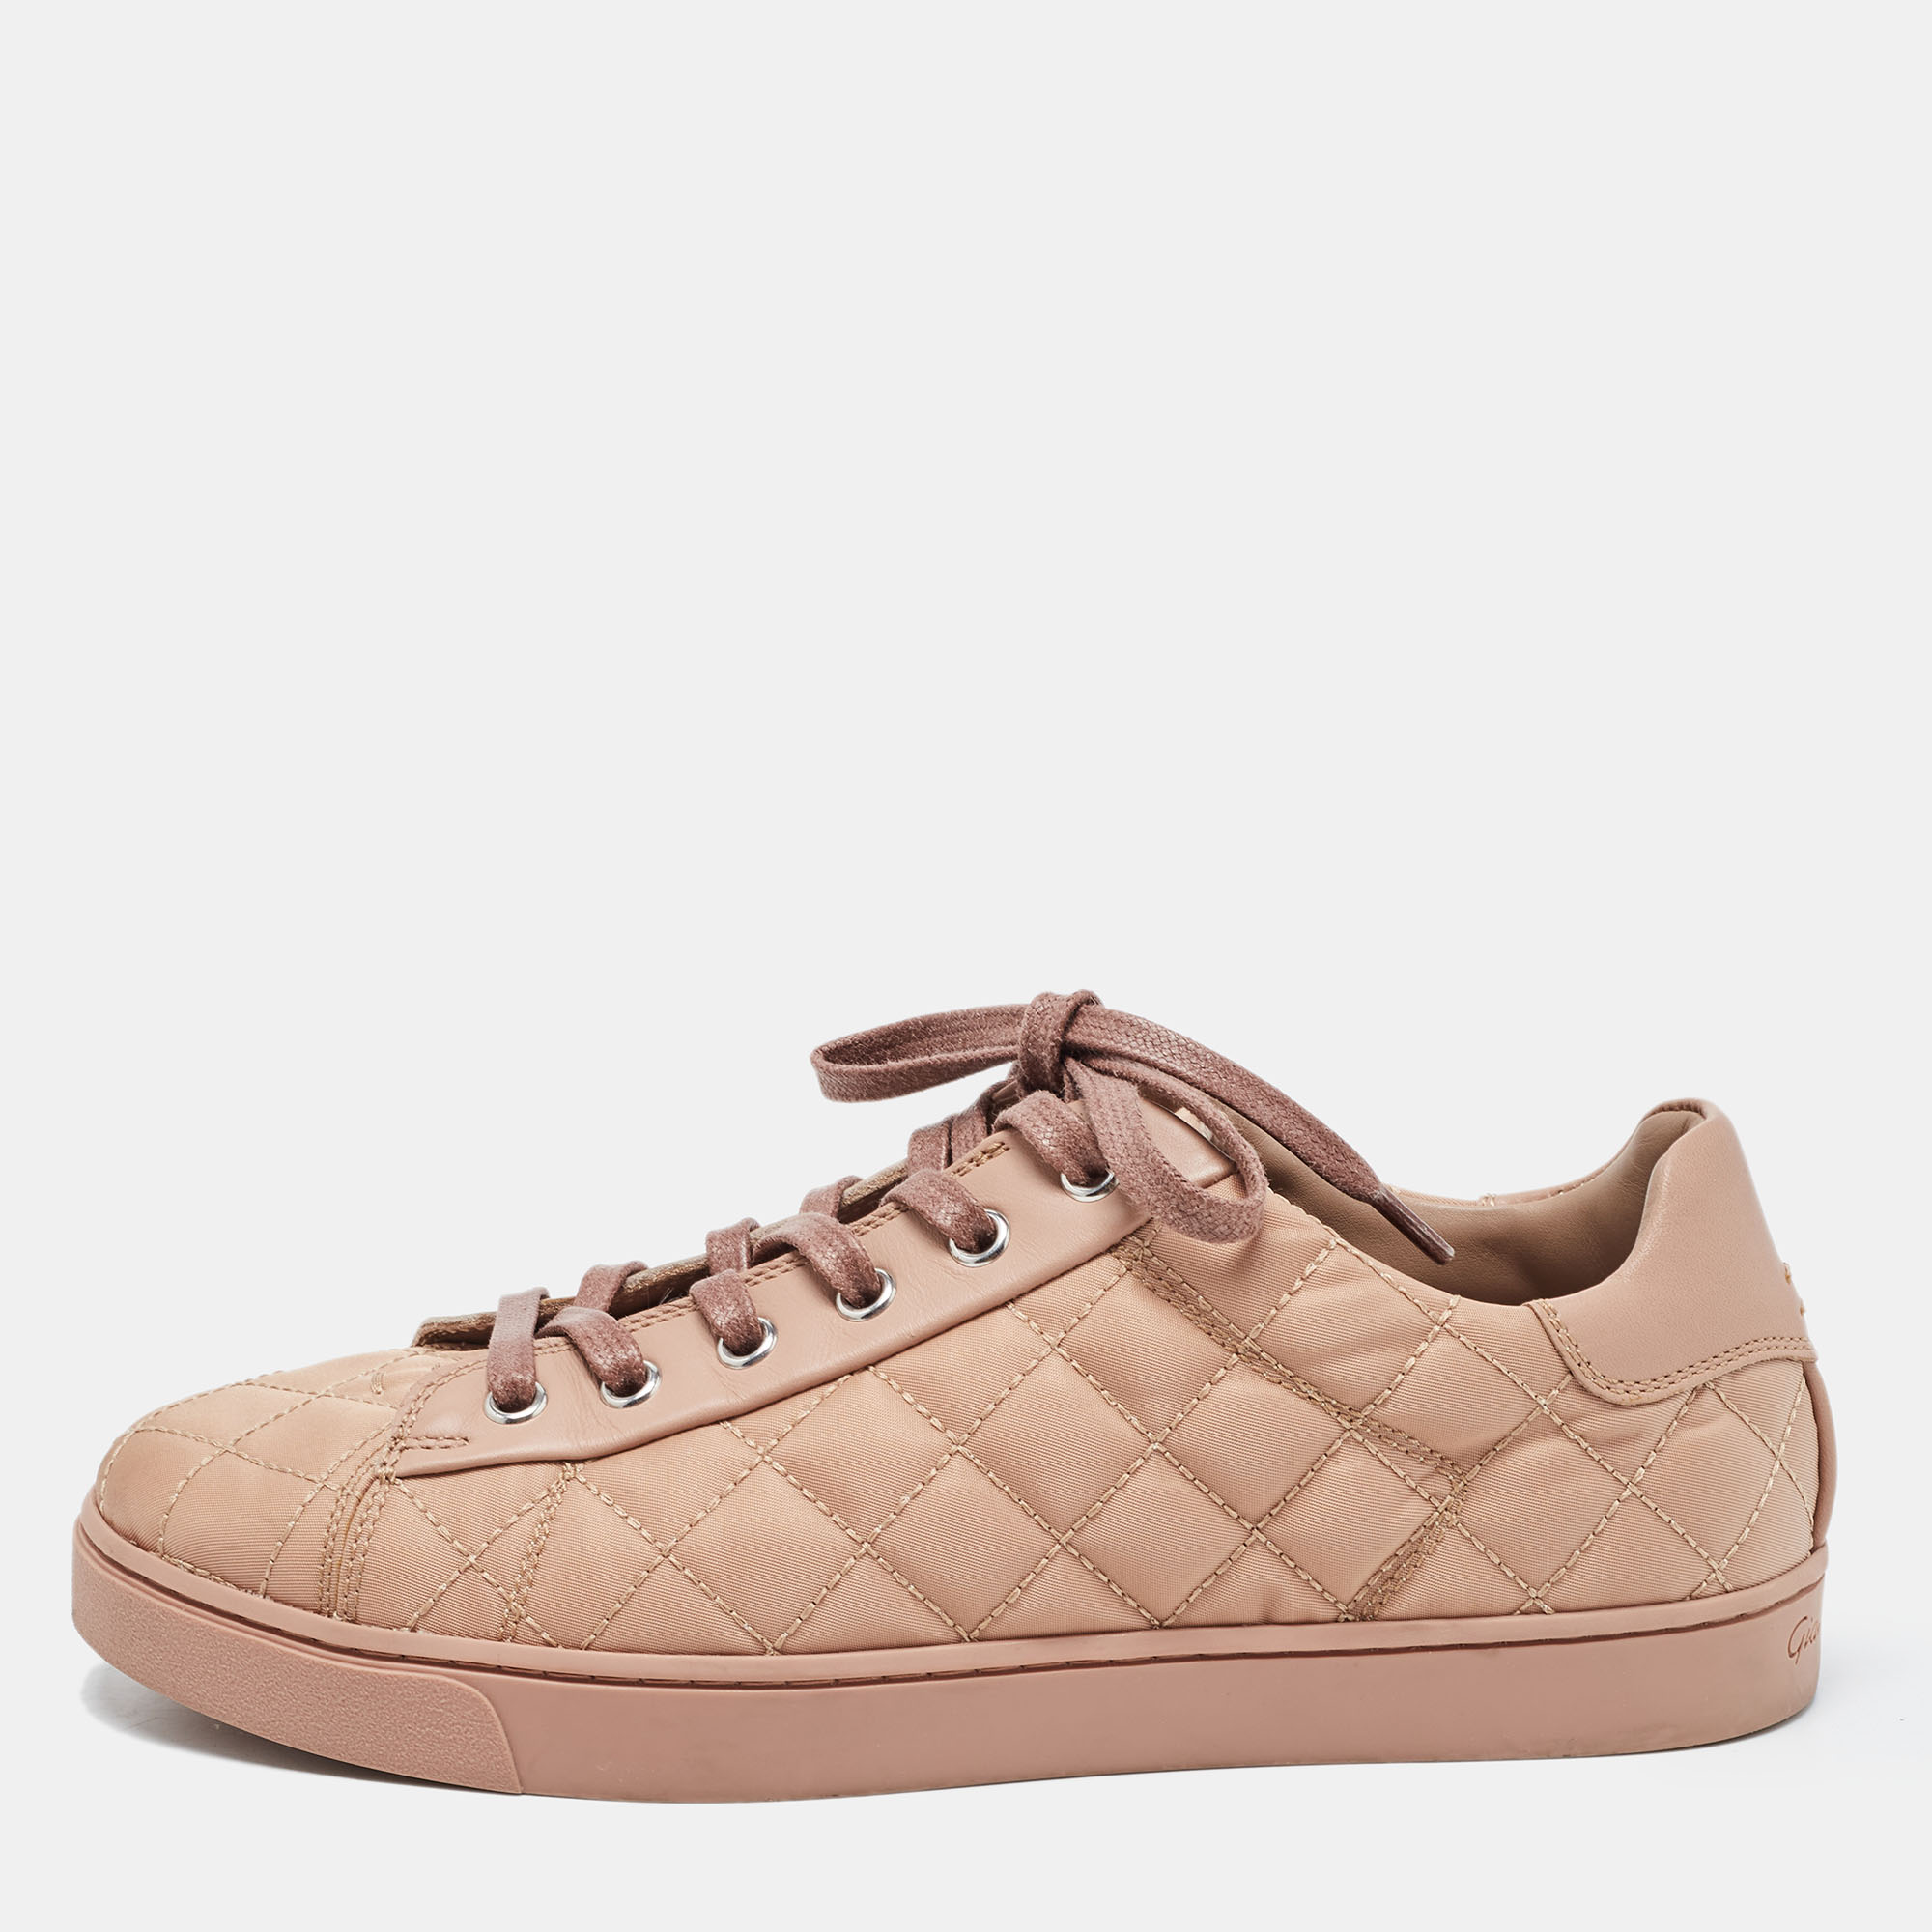 Gianvito Rossi Dusty Pink Quilted Leather Loft Low Top Sneakers Size 37